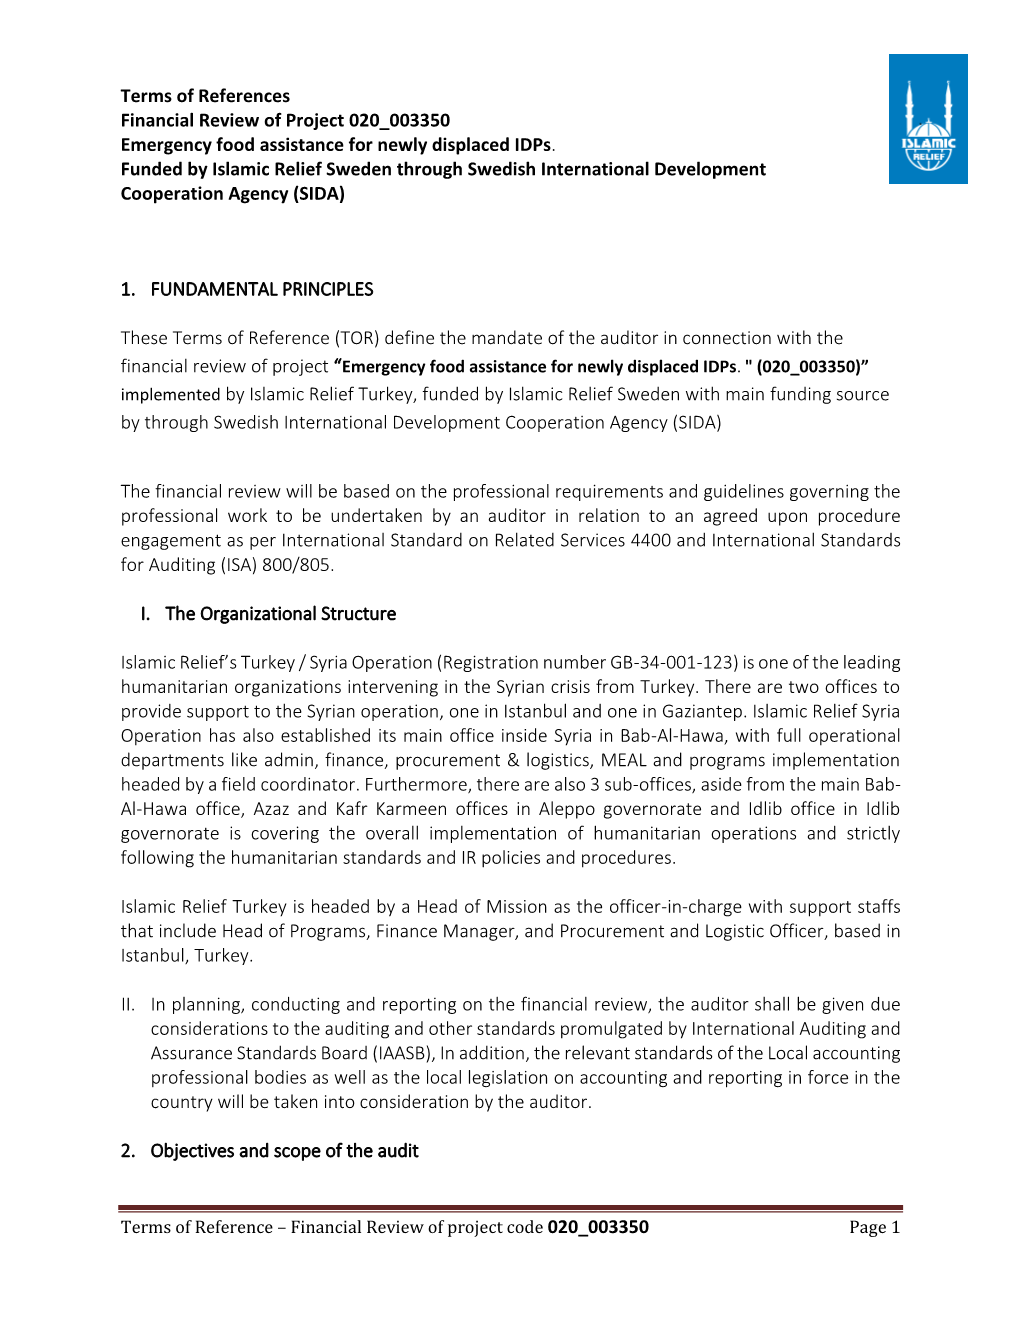 Terms of References Financial Review of Project 020 003350 Emergency Food Assistance for Newly Displaced Idps